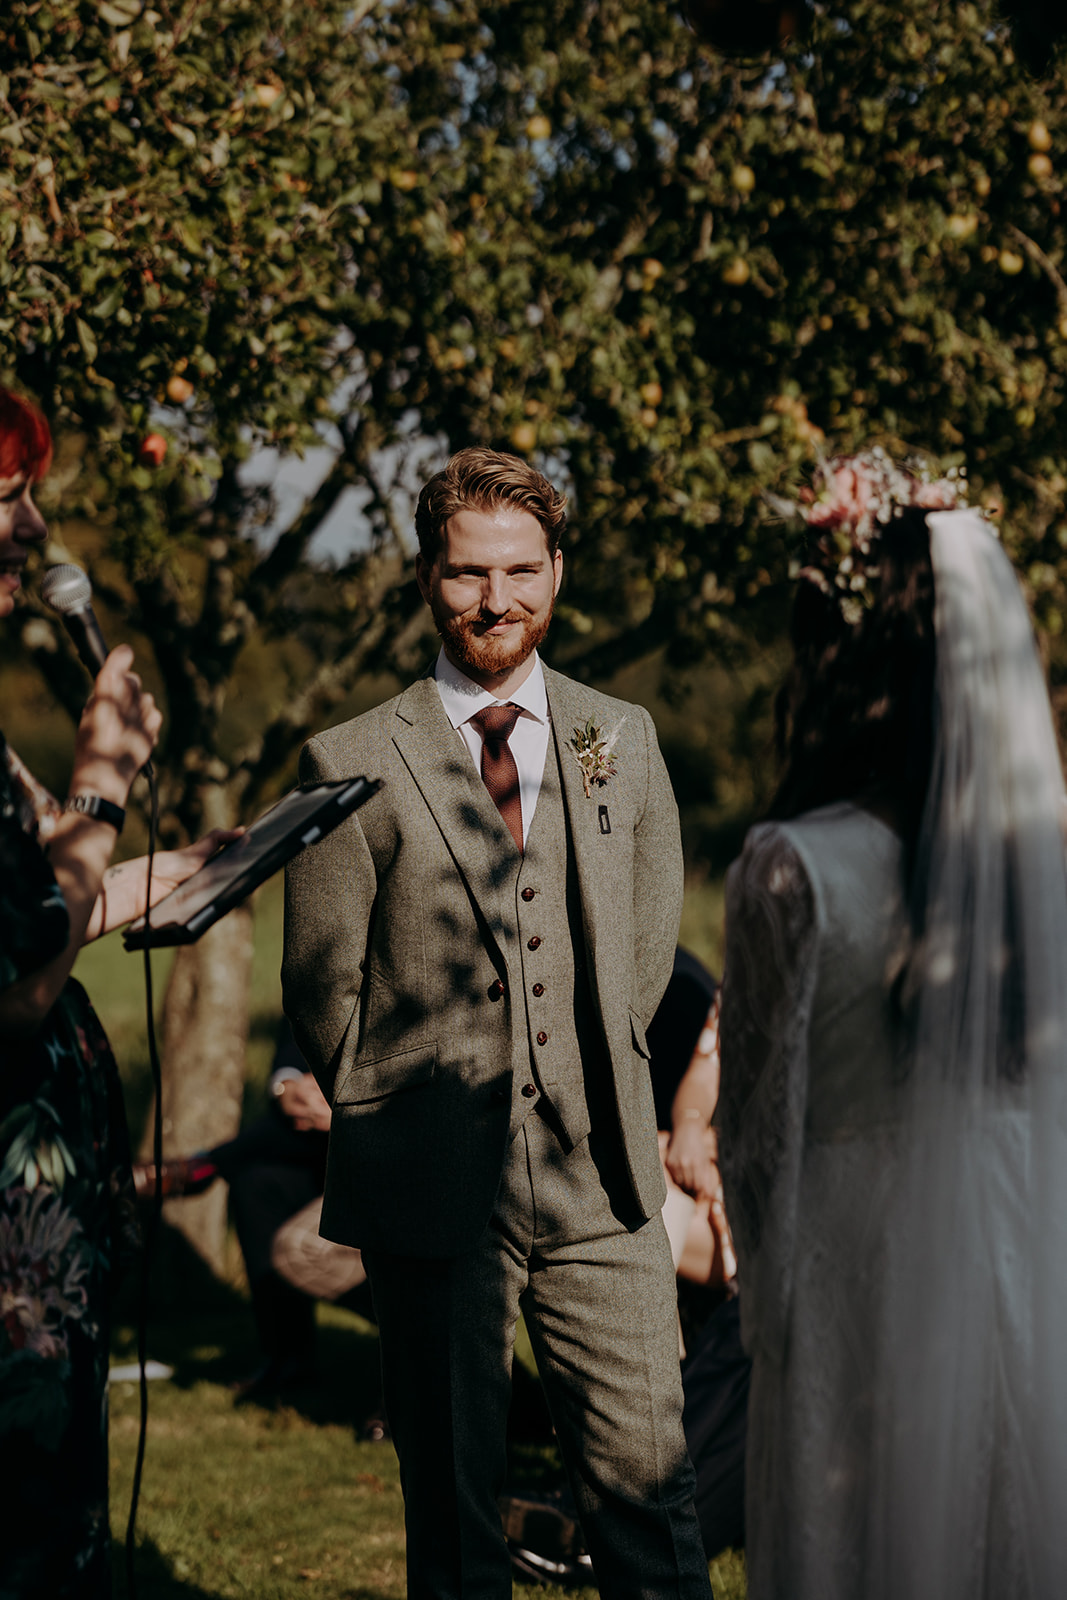 outdoor hand-fasting ceremony in an orchard